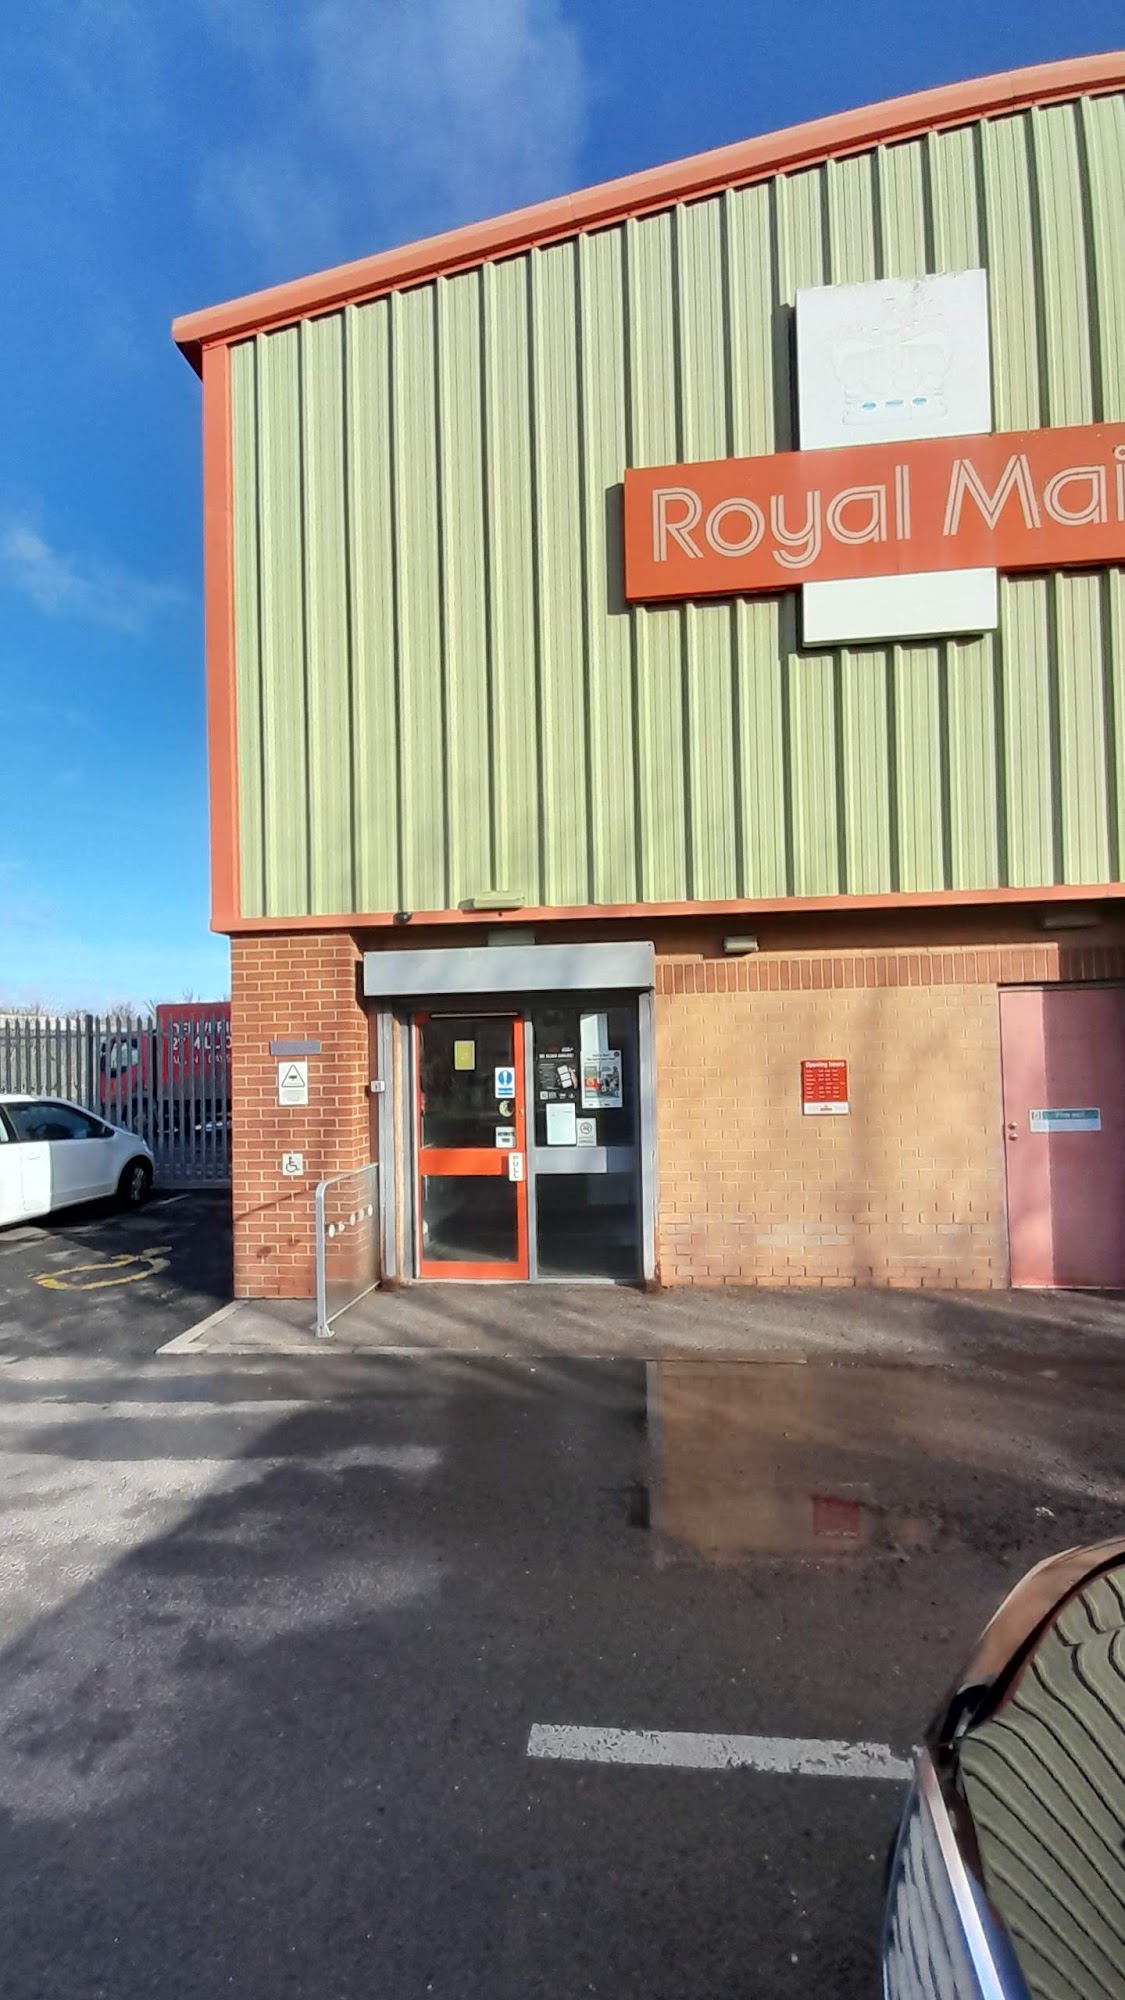 Royal Mail Driffield Delivery Office